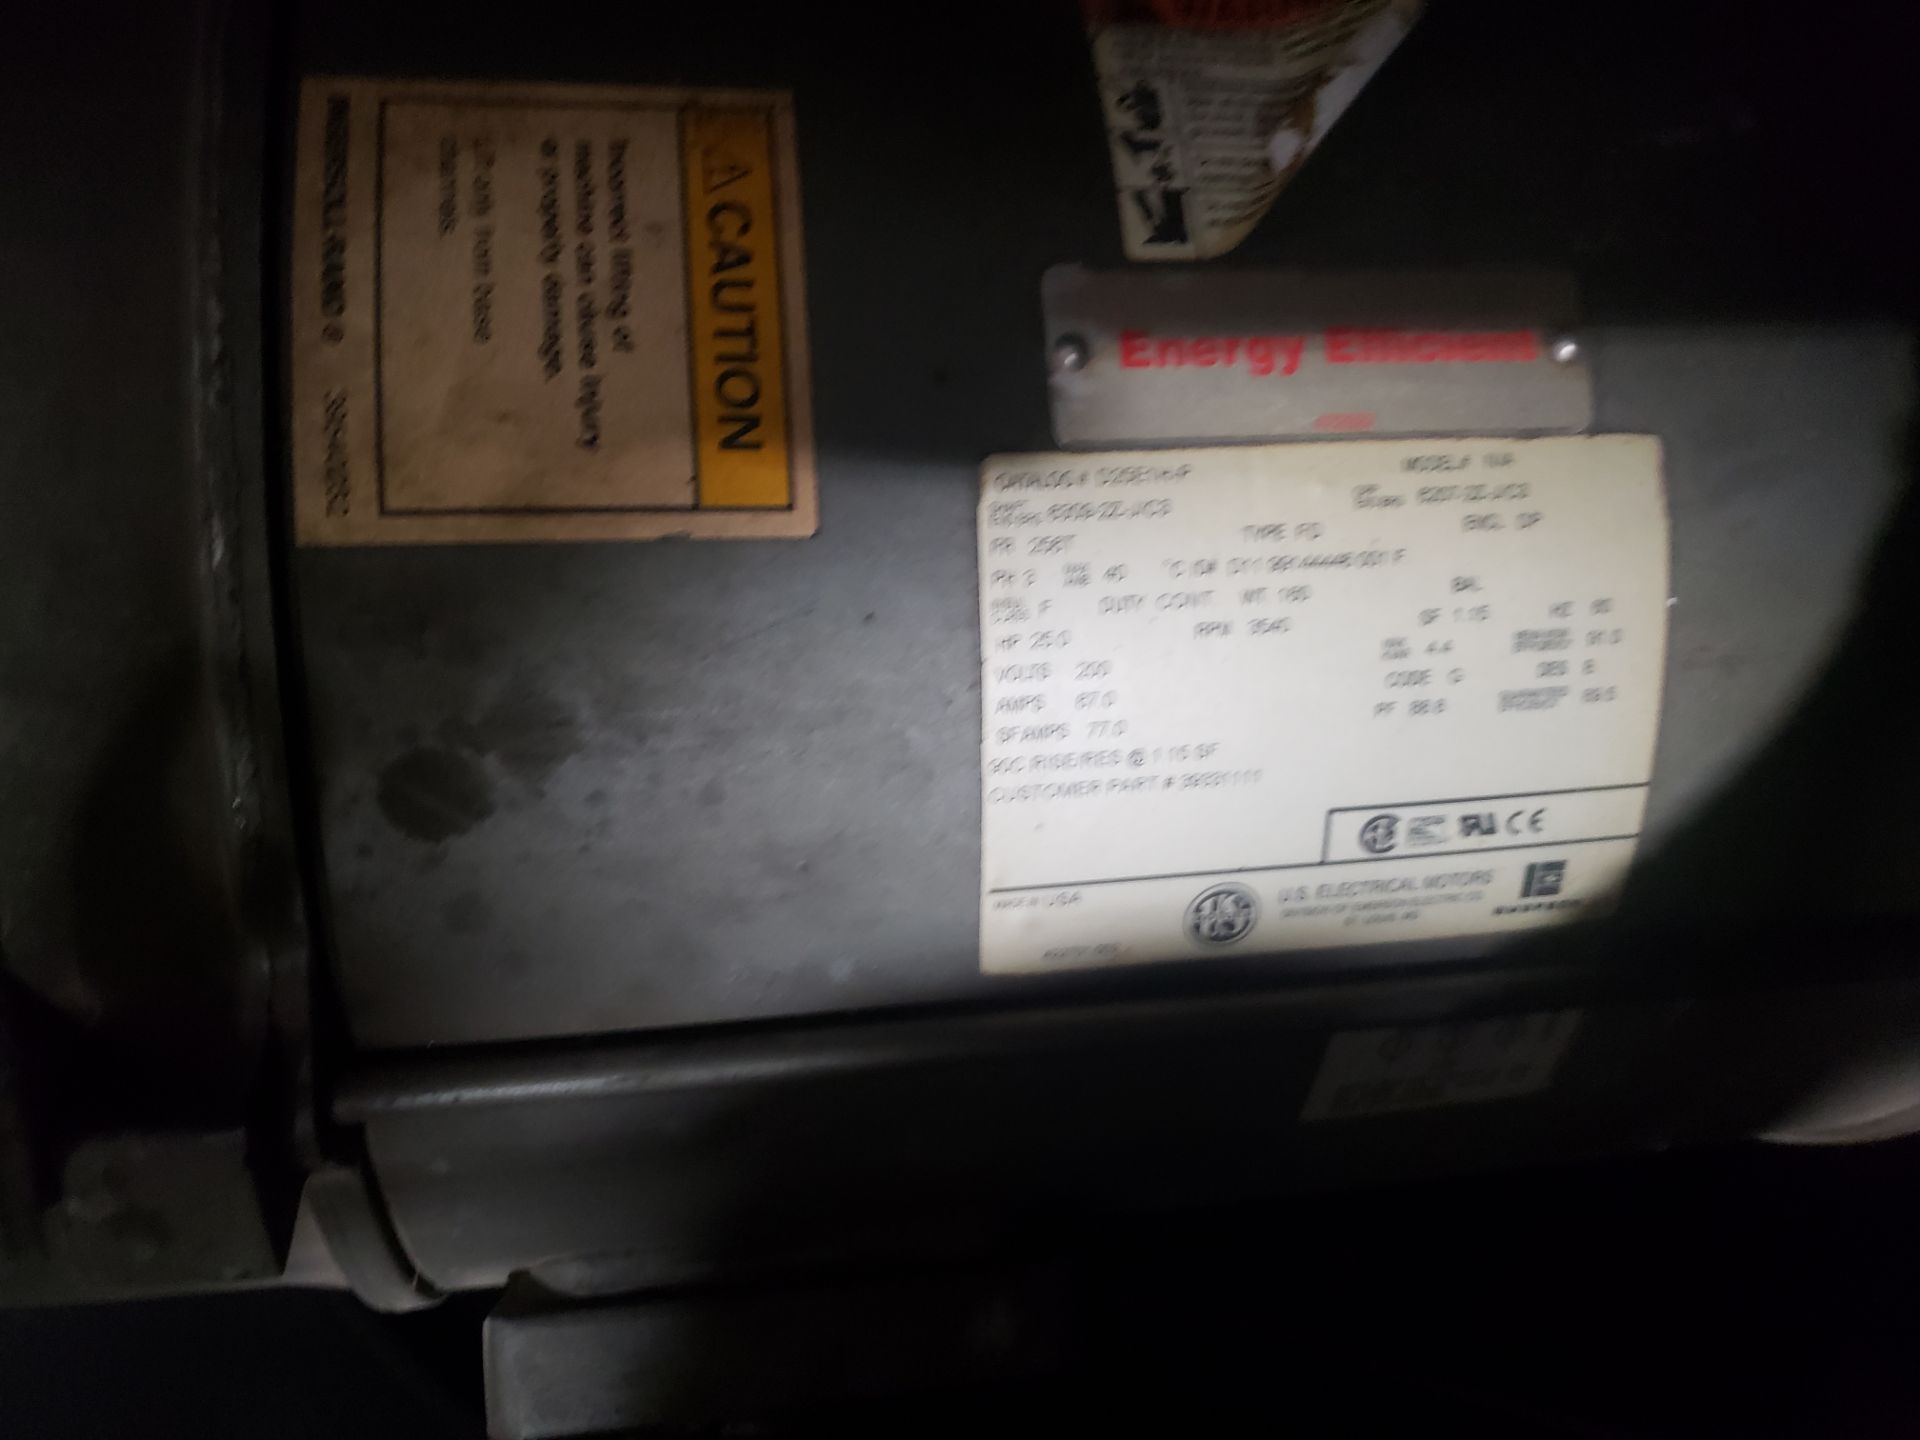 Ingersoll-Rand modle SSR-EP25 Air Compressor, 97 CFM, 125 psi located Worcester, MA - Image 6 of 8